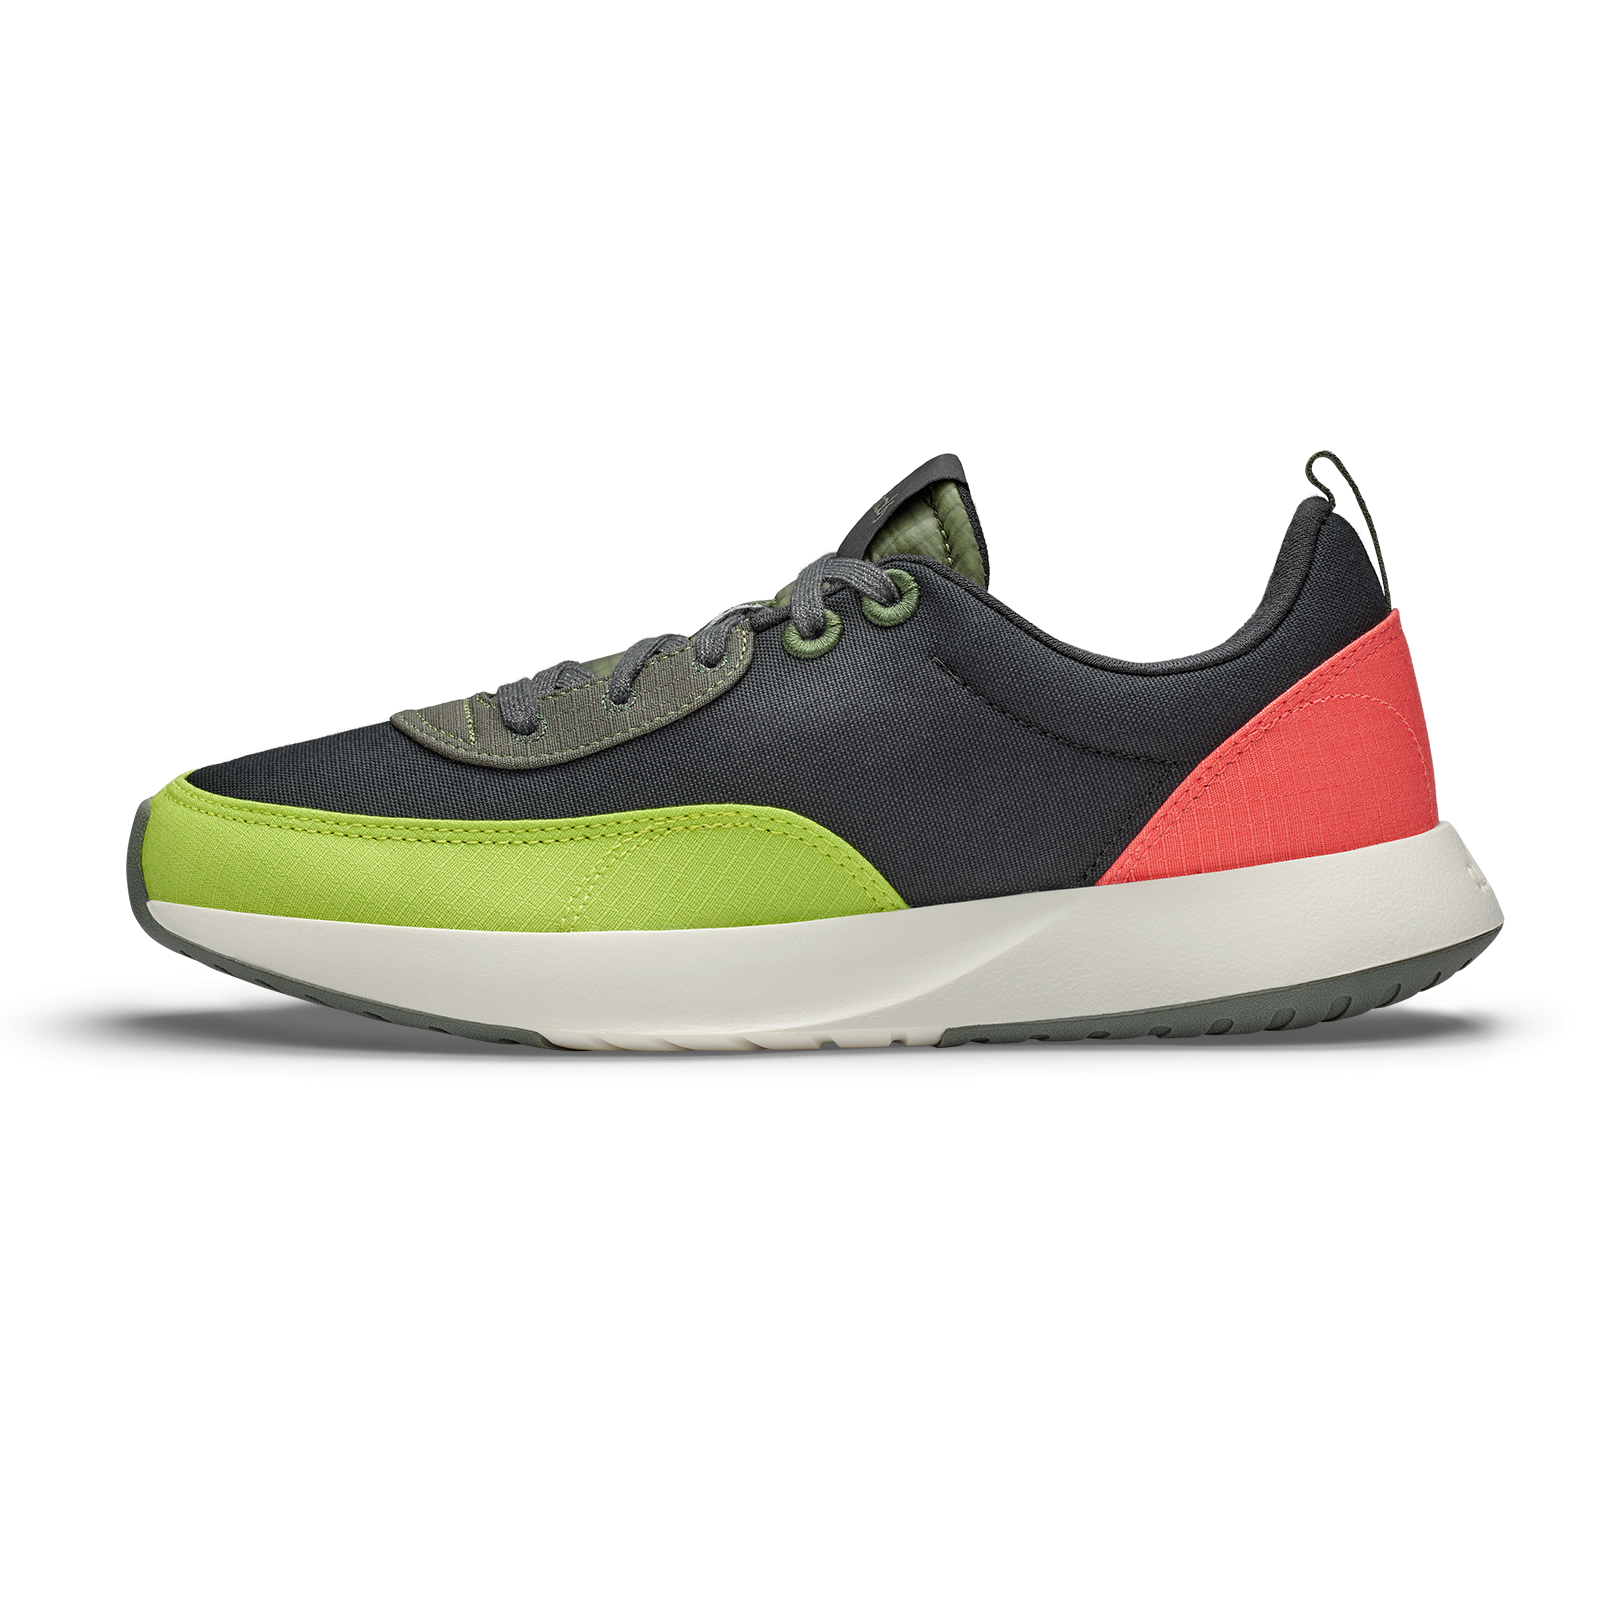 Men's Couriers - Natural Black / Bloom Green (Blizzard Sole)